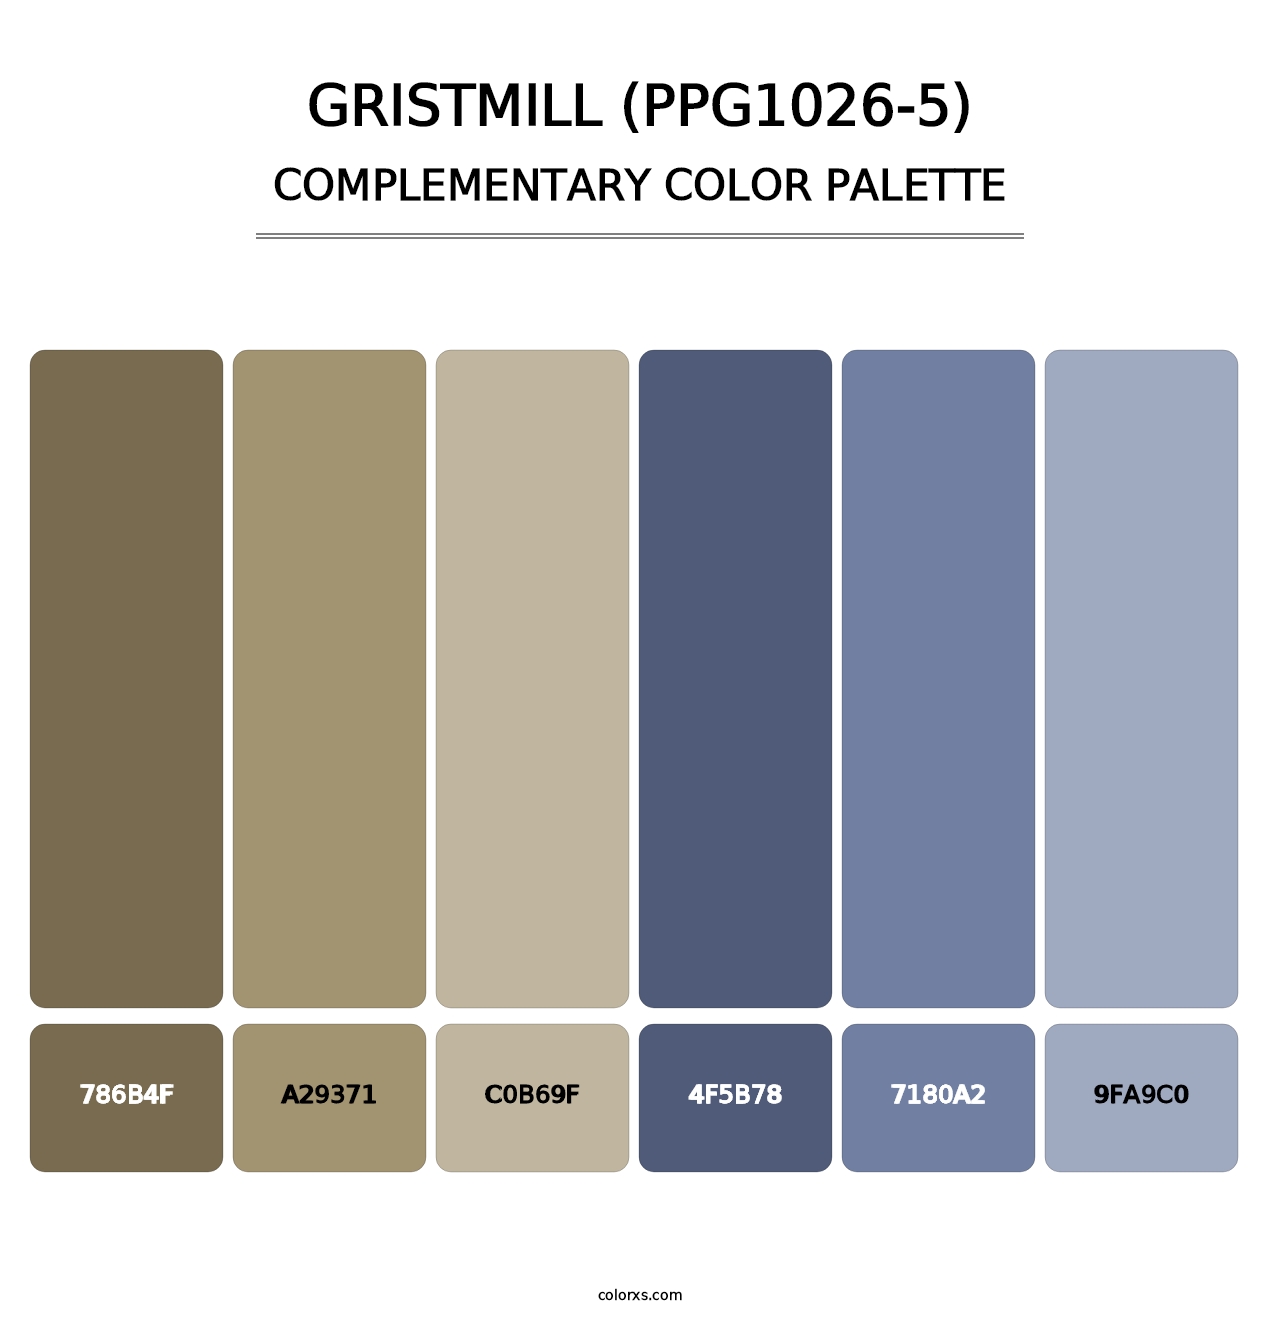 Gristmill (PPG1026-5) - Complementary Color Palette